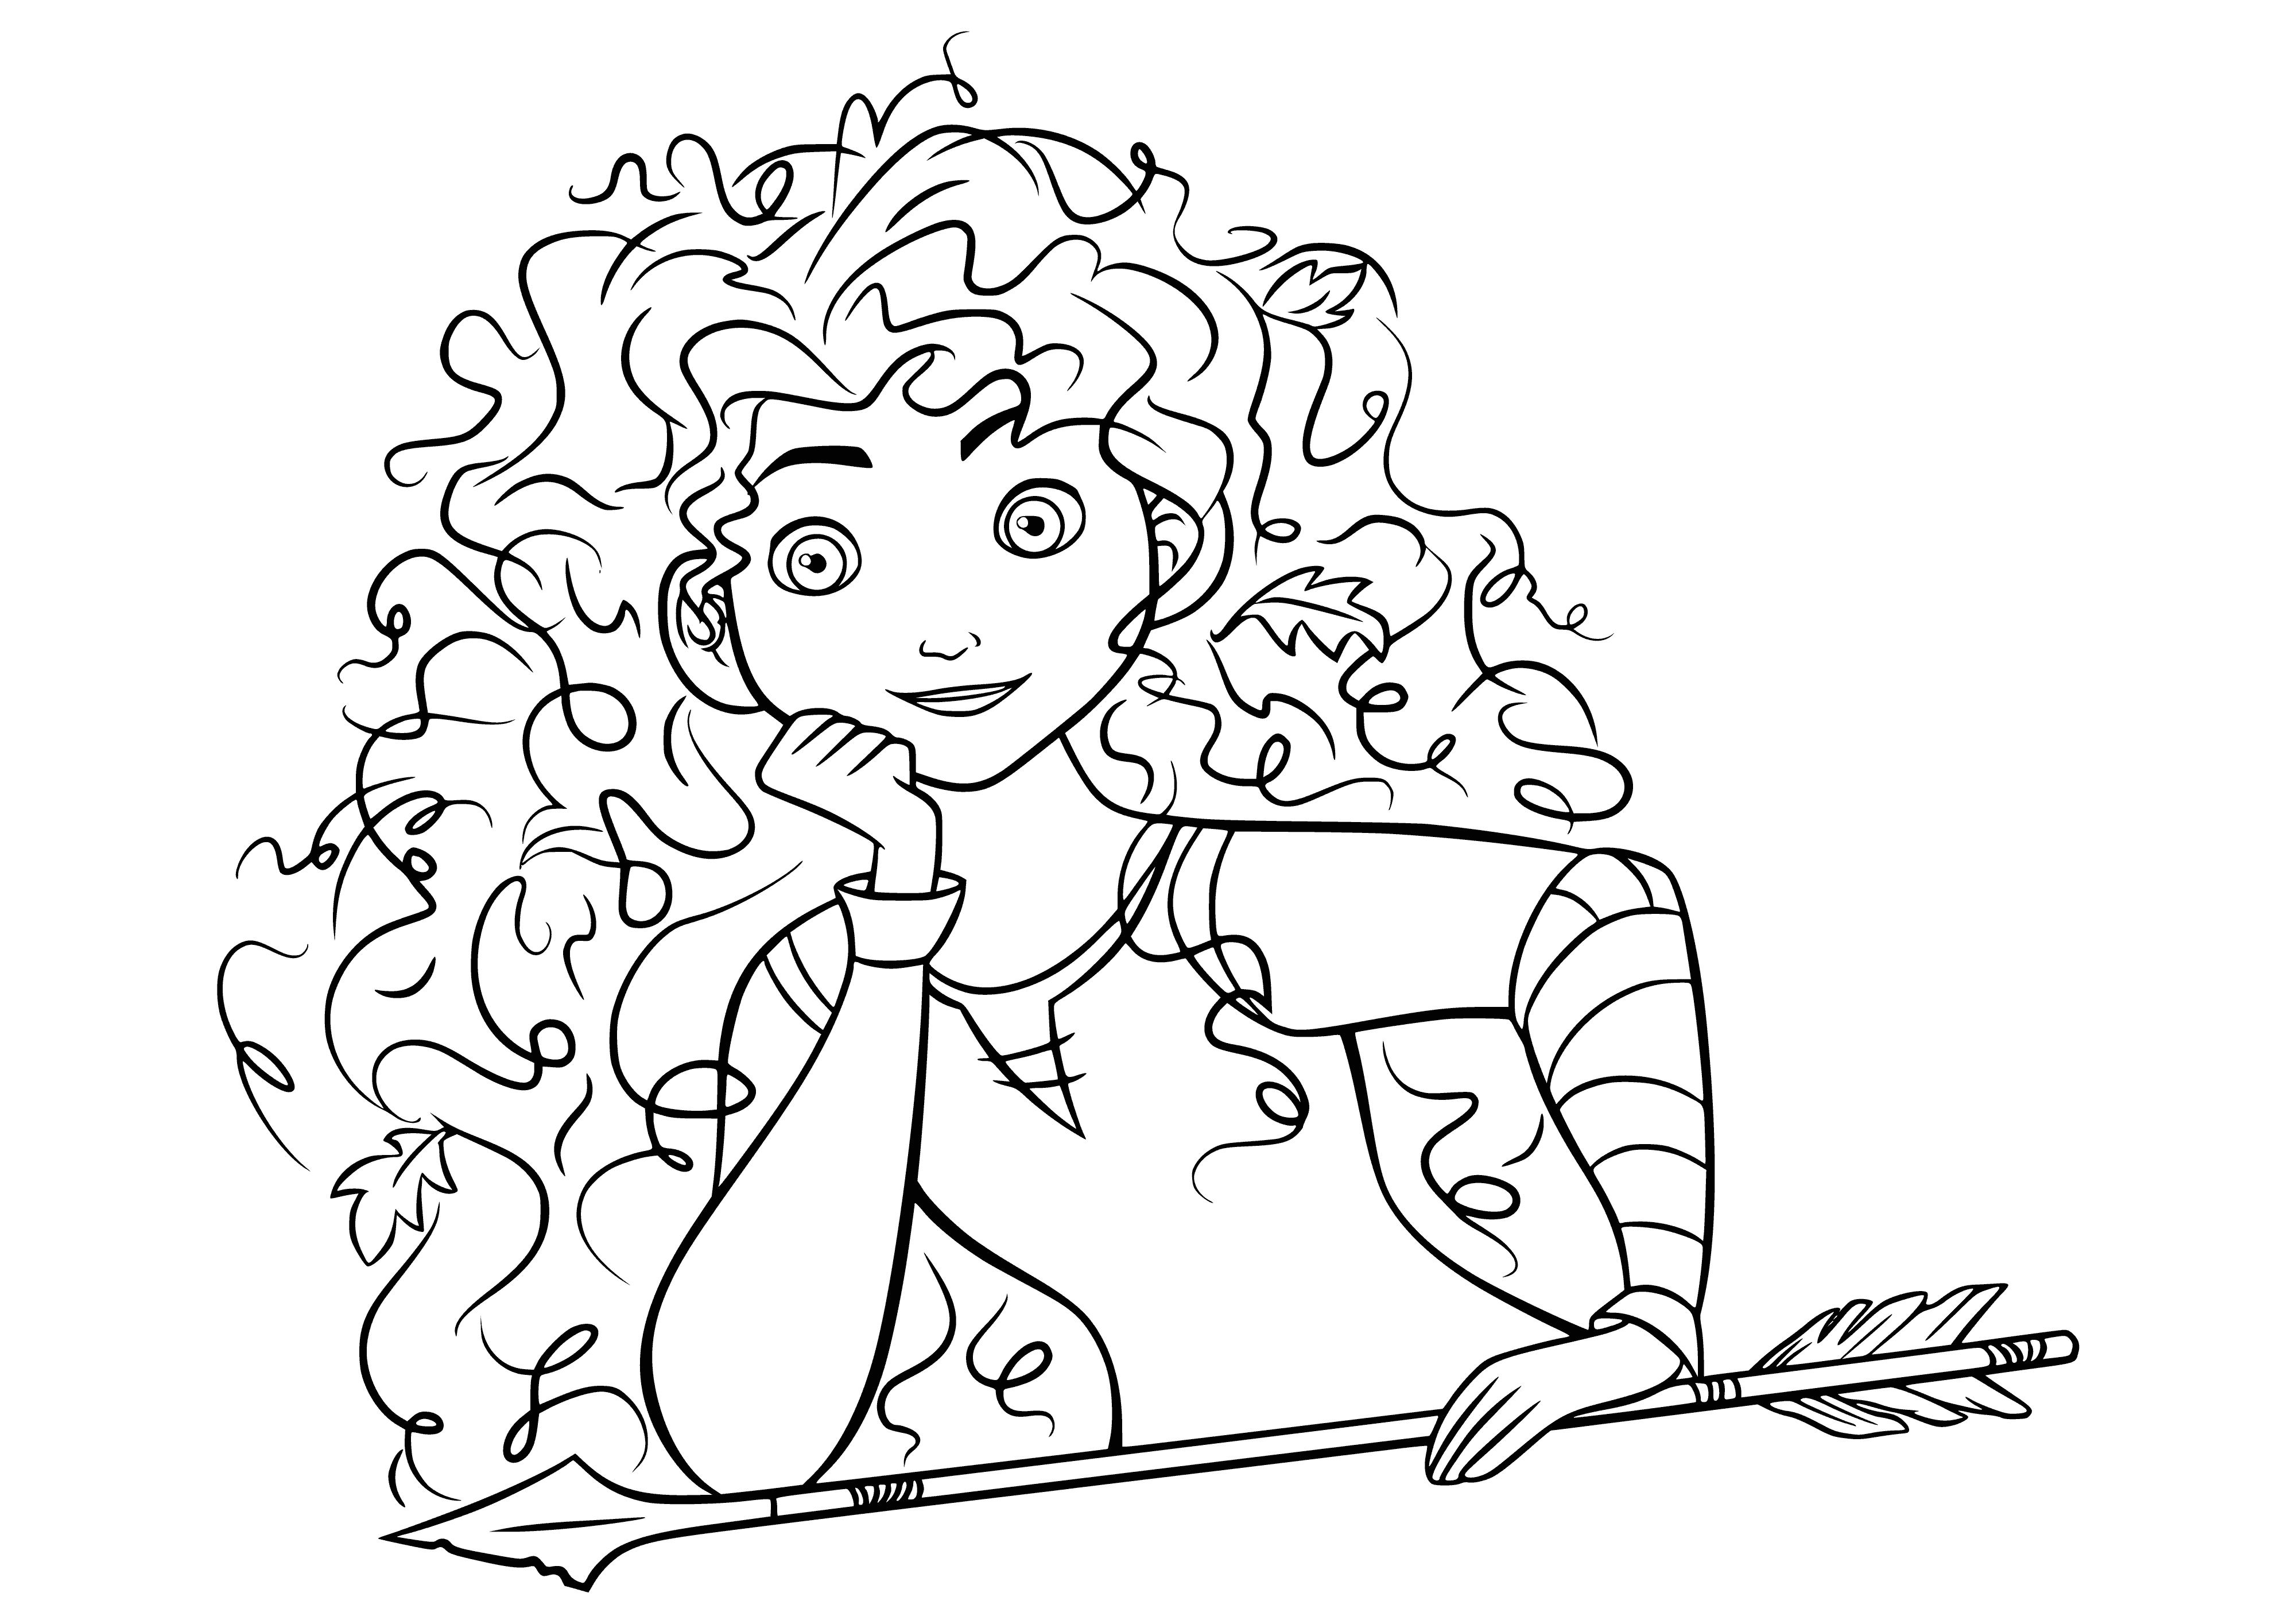 Merida holds an arrow coloring page